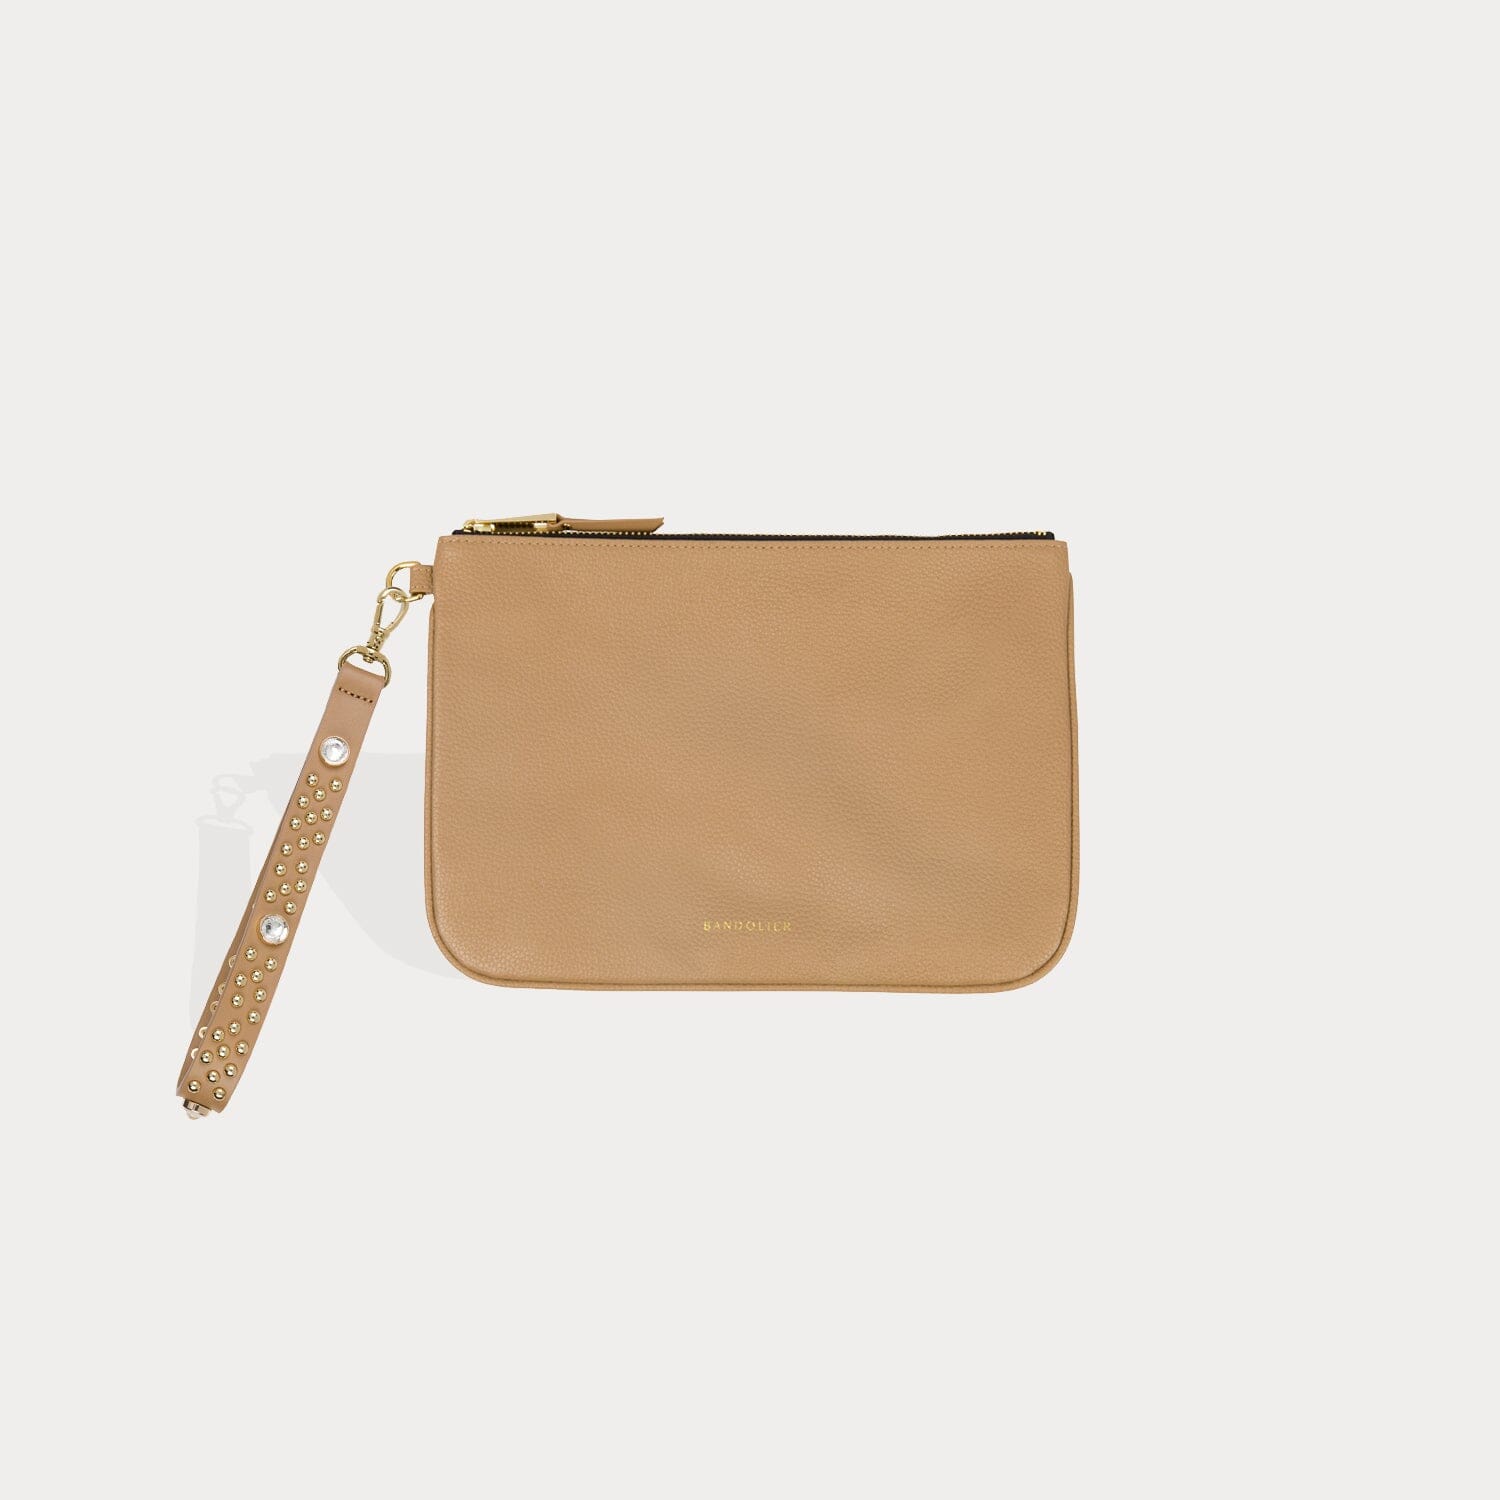 Ava Clutch - Tan/Gold pack Bandolier 